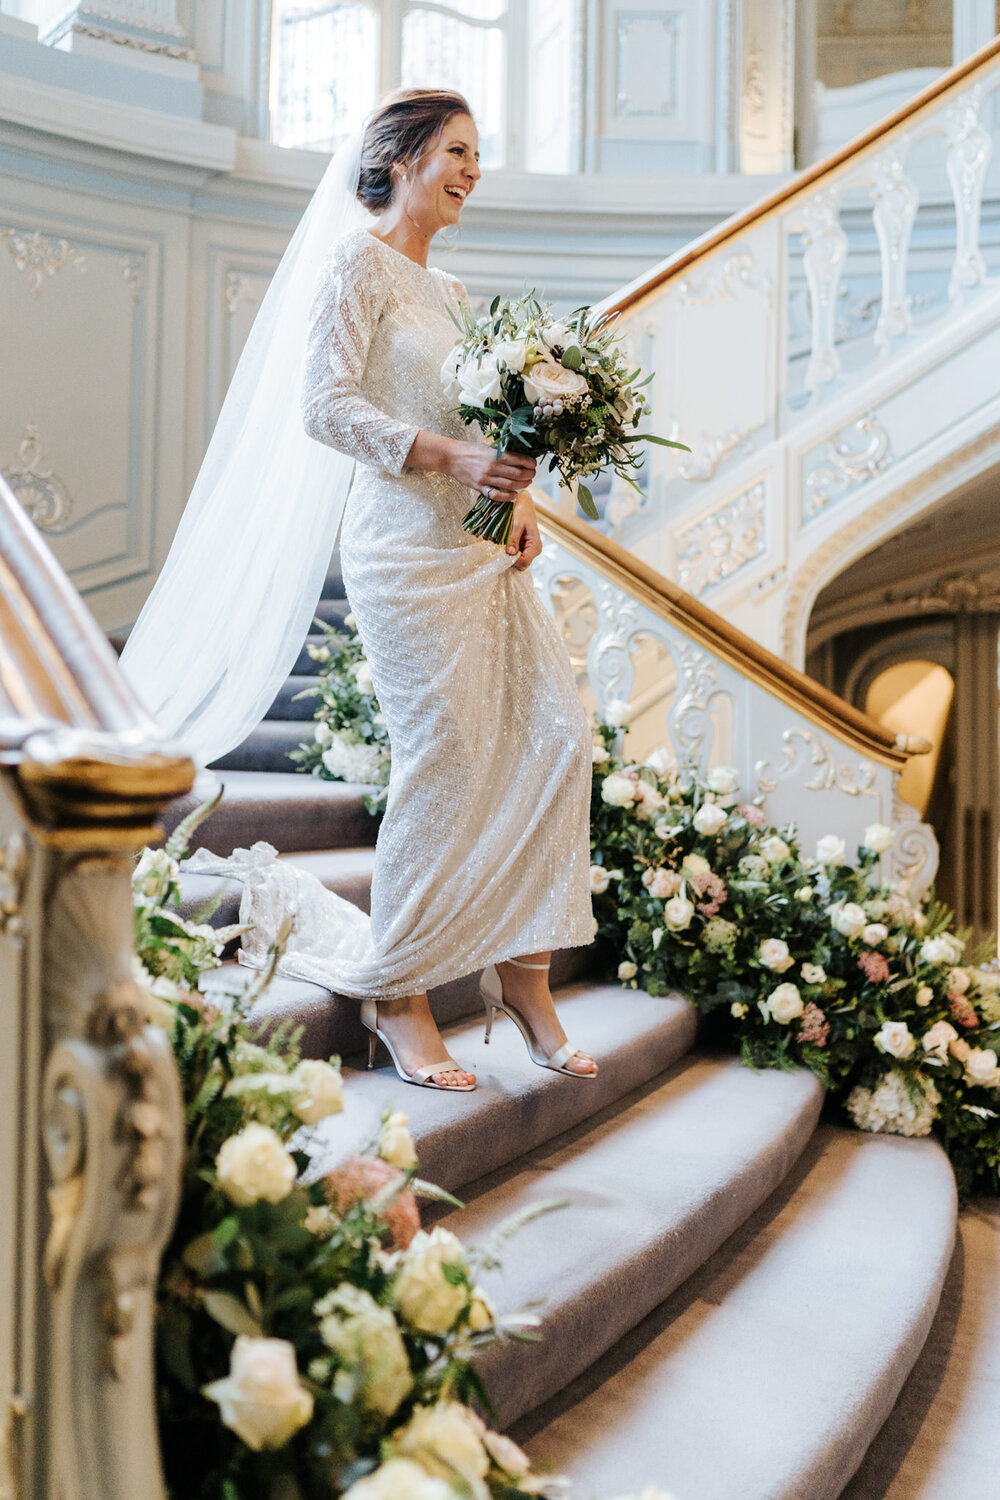 Bride walks down the flower decorated stairs at Savile Club in London before guests begin to arrive for the wedding breakfast